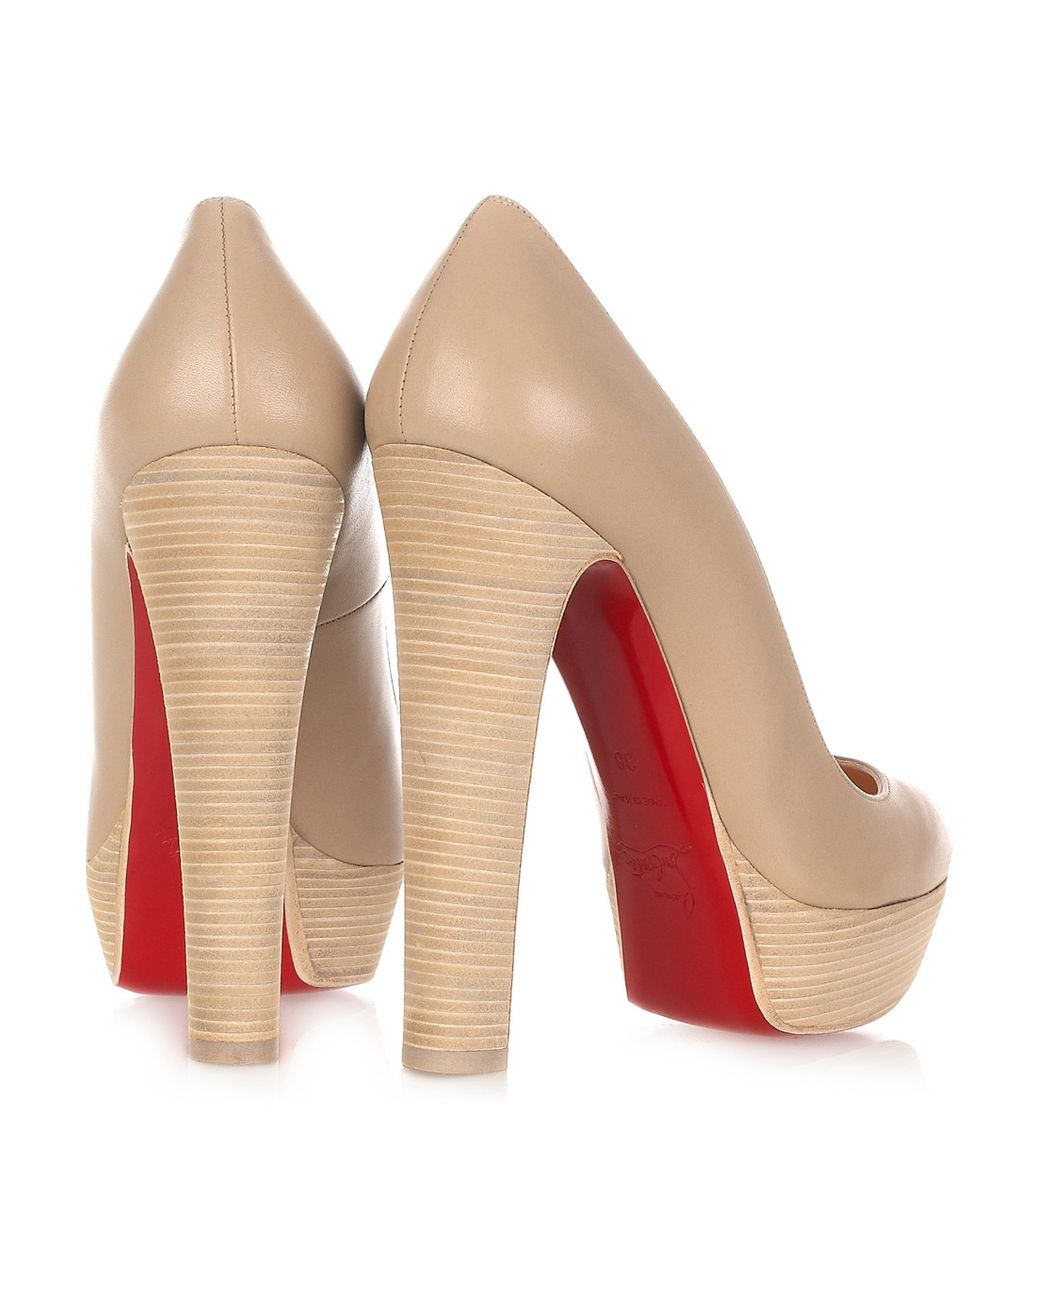 Christian Louboutin Bibi 140 Leather Pumps in Brown (Natural) | Lyst